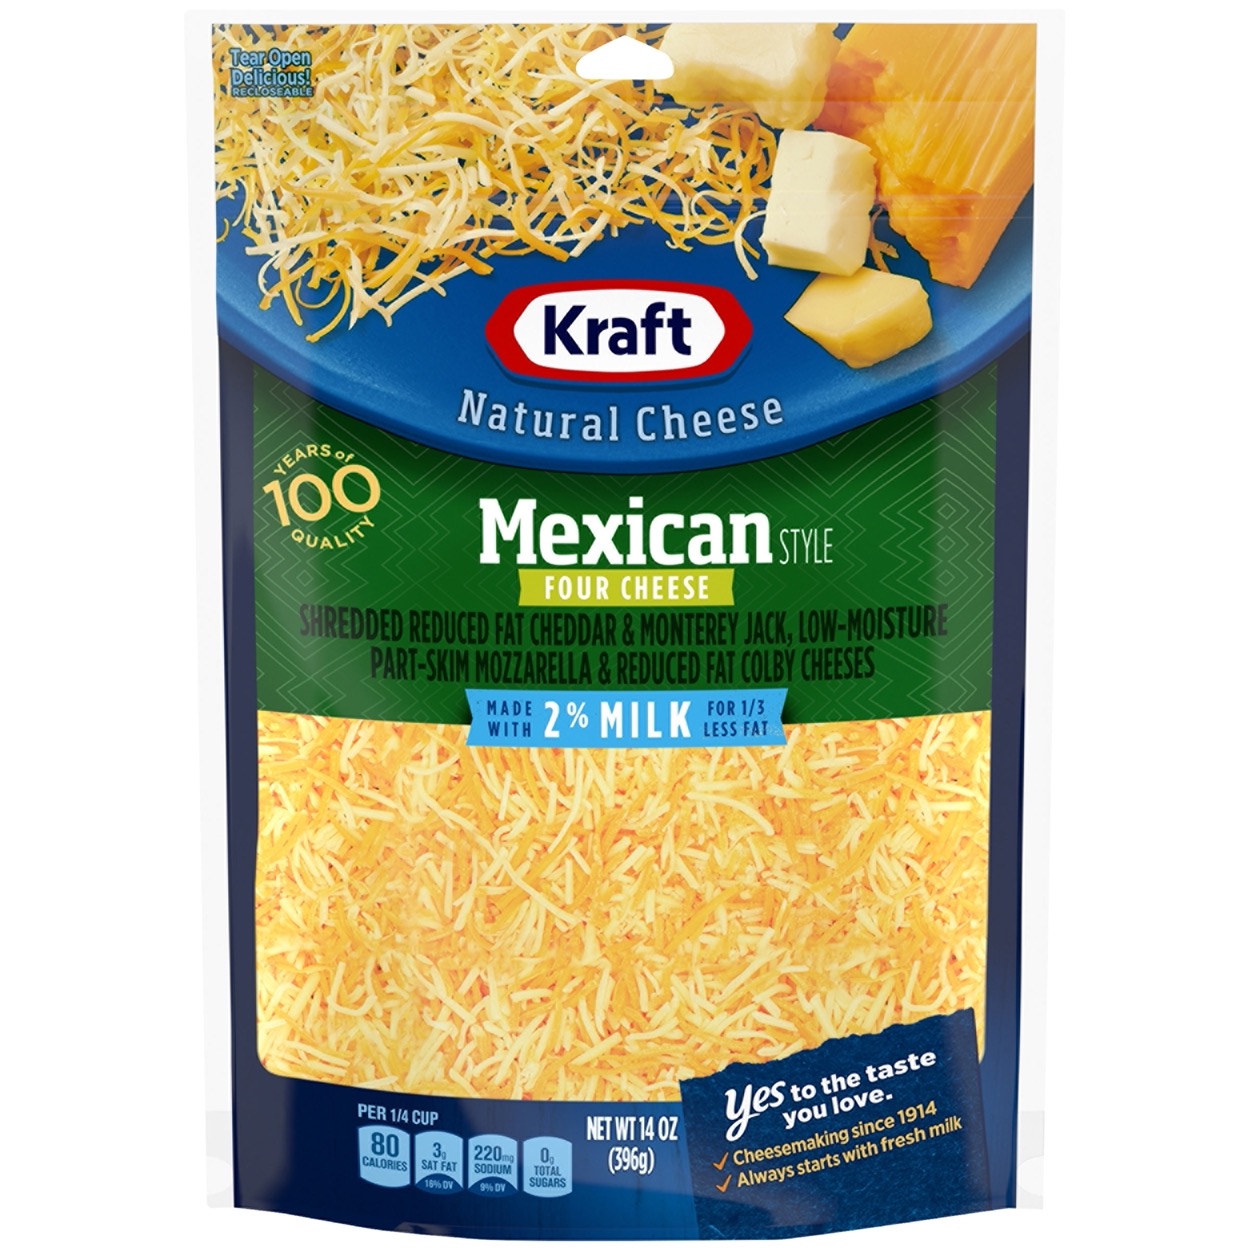 Mexican Style Four Cheese (2% Milk, Finely Shredded)